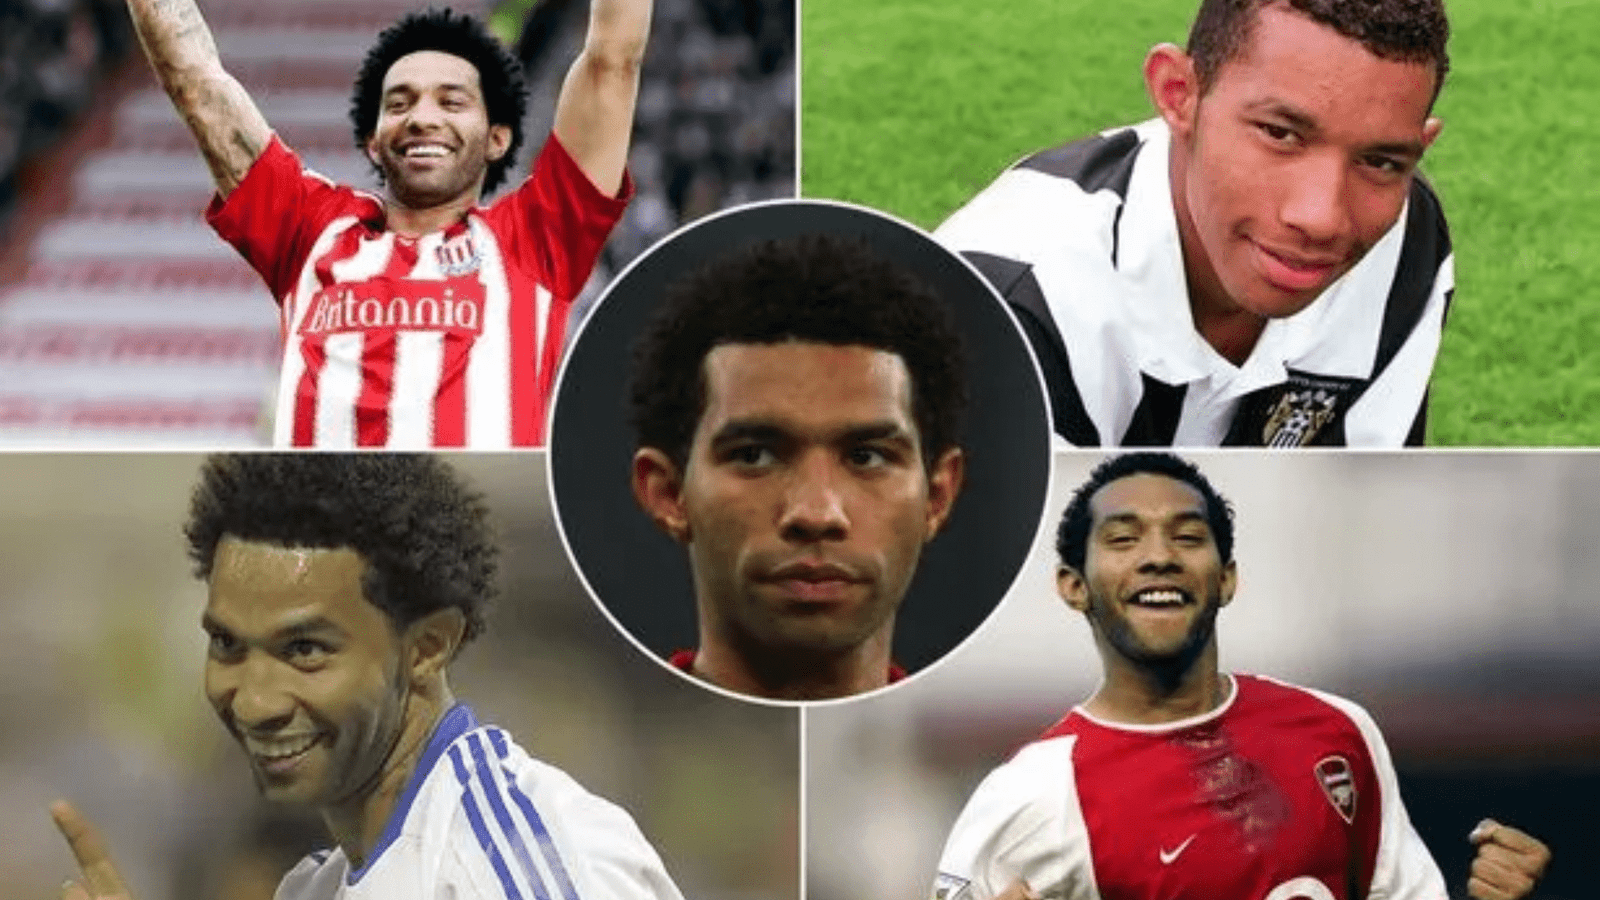 Jermaine Lloyd Pennant Life Story – Biography, Childhood, Career, Girlfriends, Childrens, and Physical Appearance 